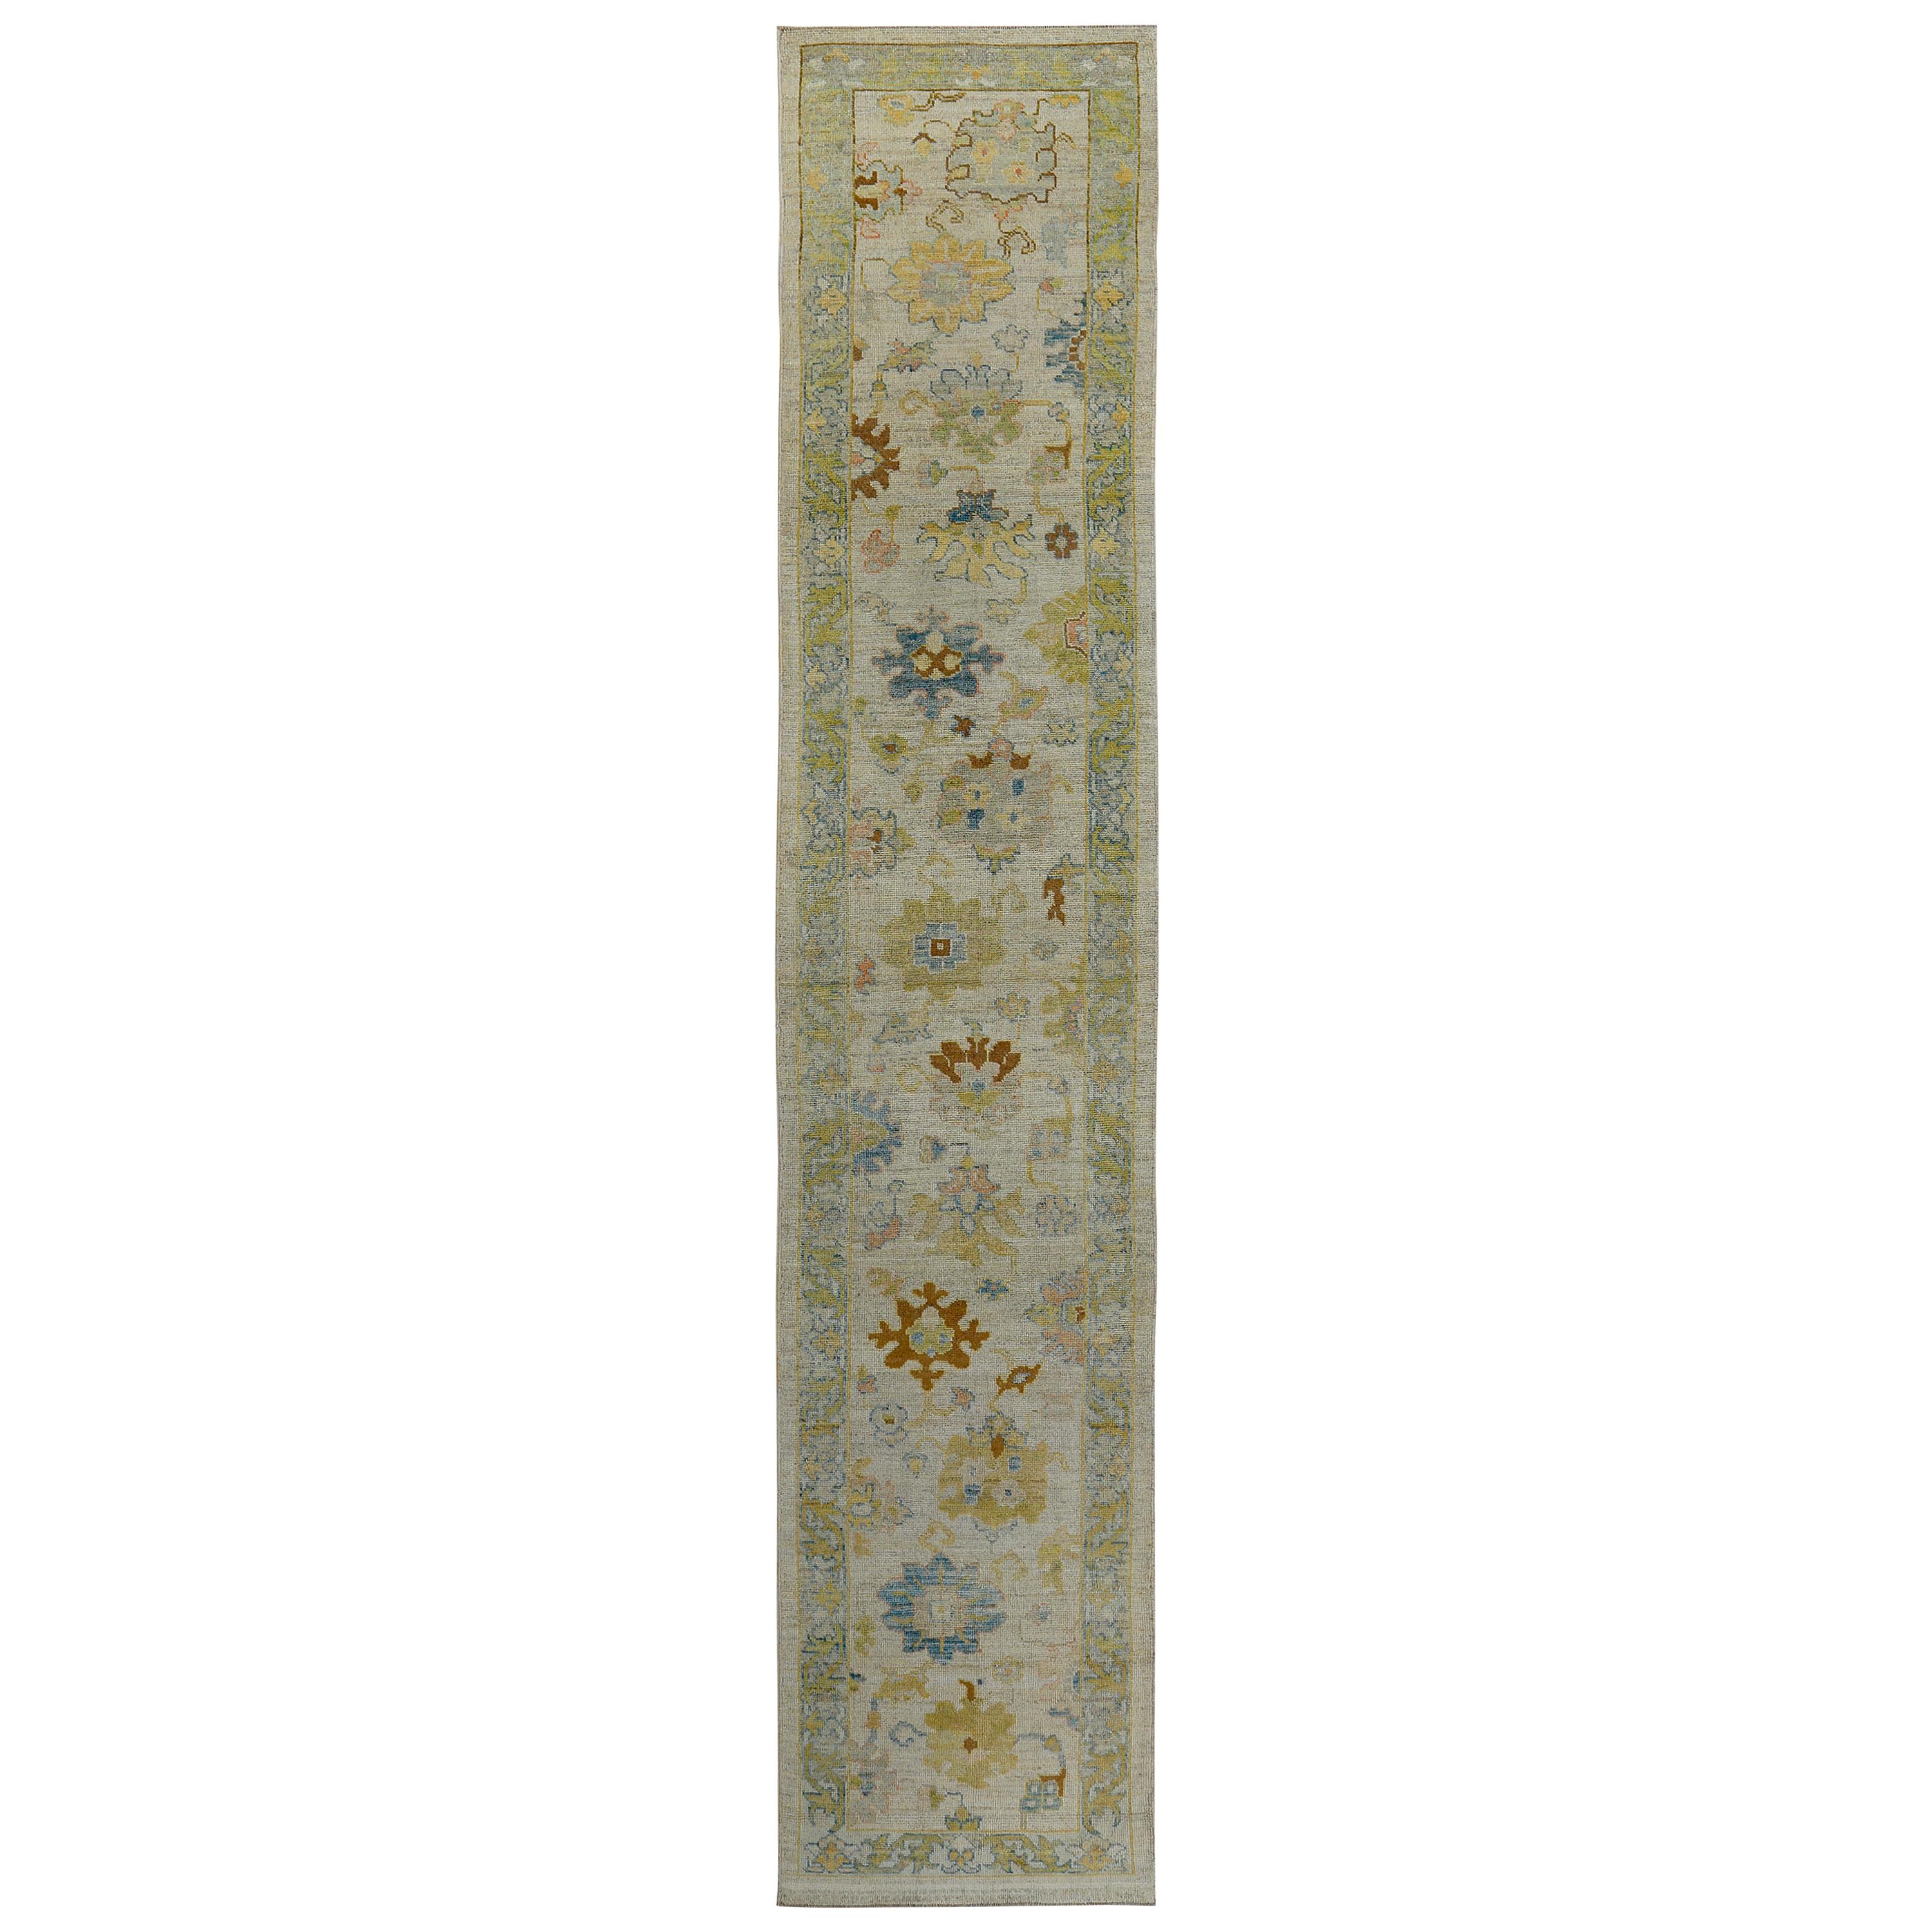 Turkish Oushak Runner Rug with Gold & Blue Floral Details on Ivory Field